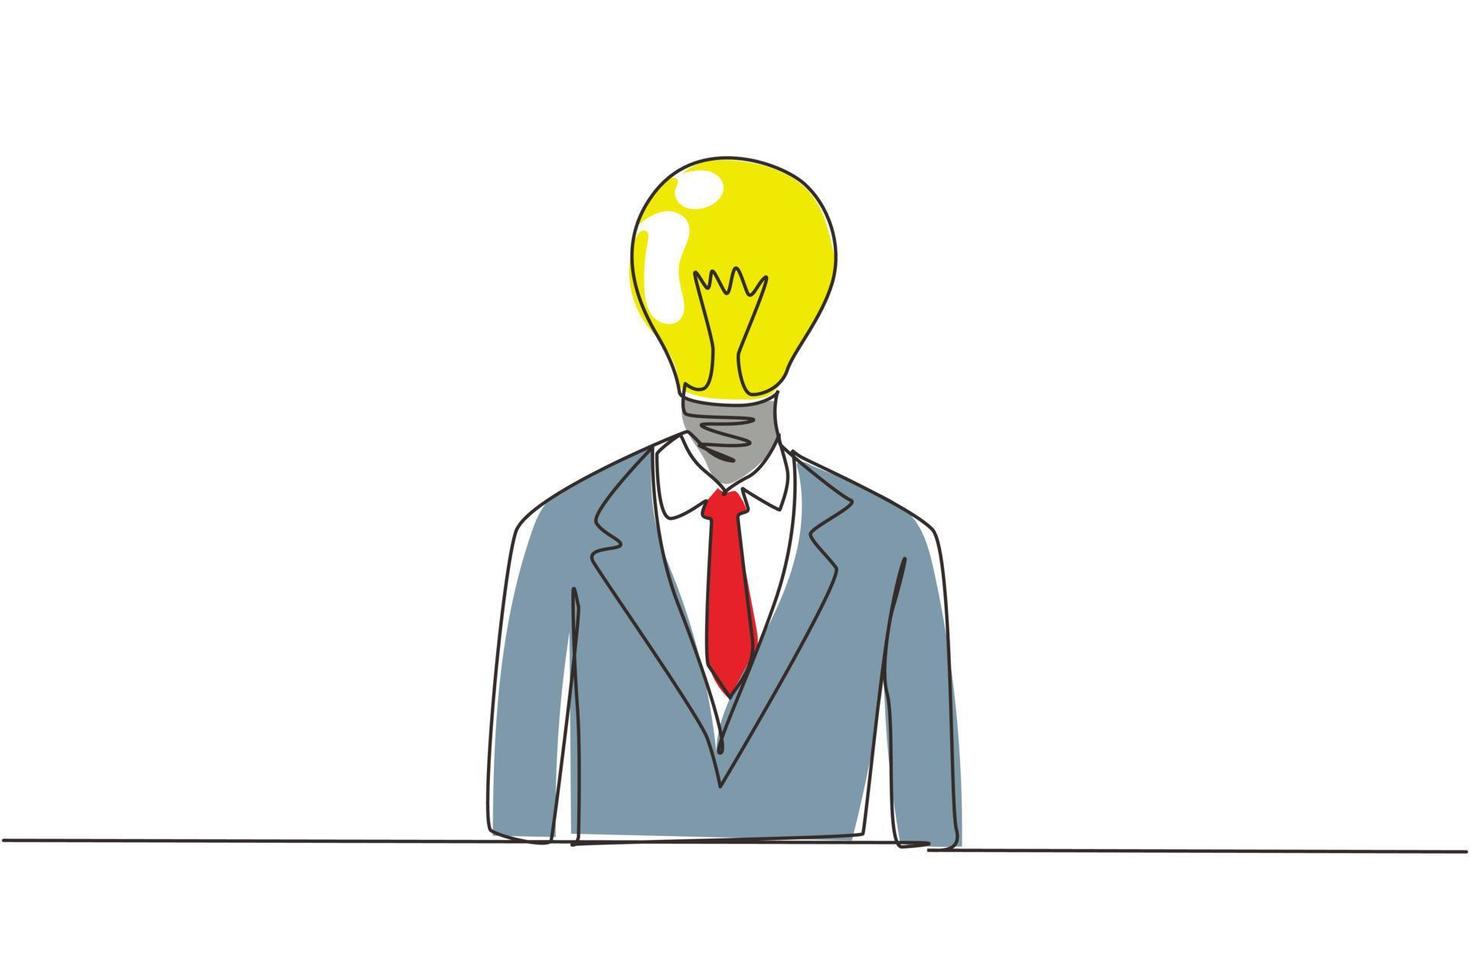 Single one line drawing businessman with light bulb instead of head. Business idea. Huge glowing light bulb instead of head thinking, brainstorming. Continuous line draw design vector illustration